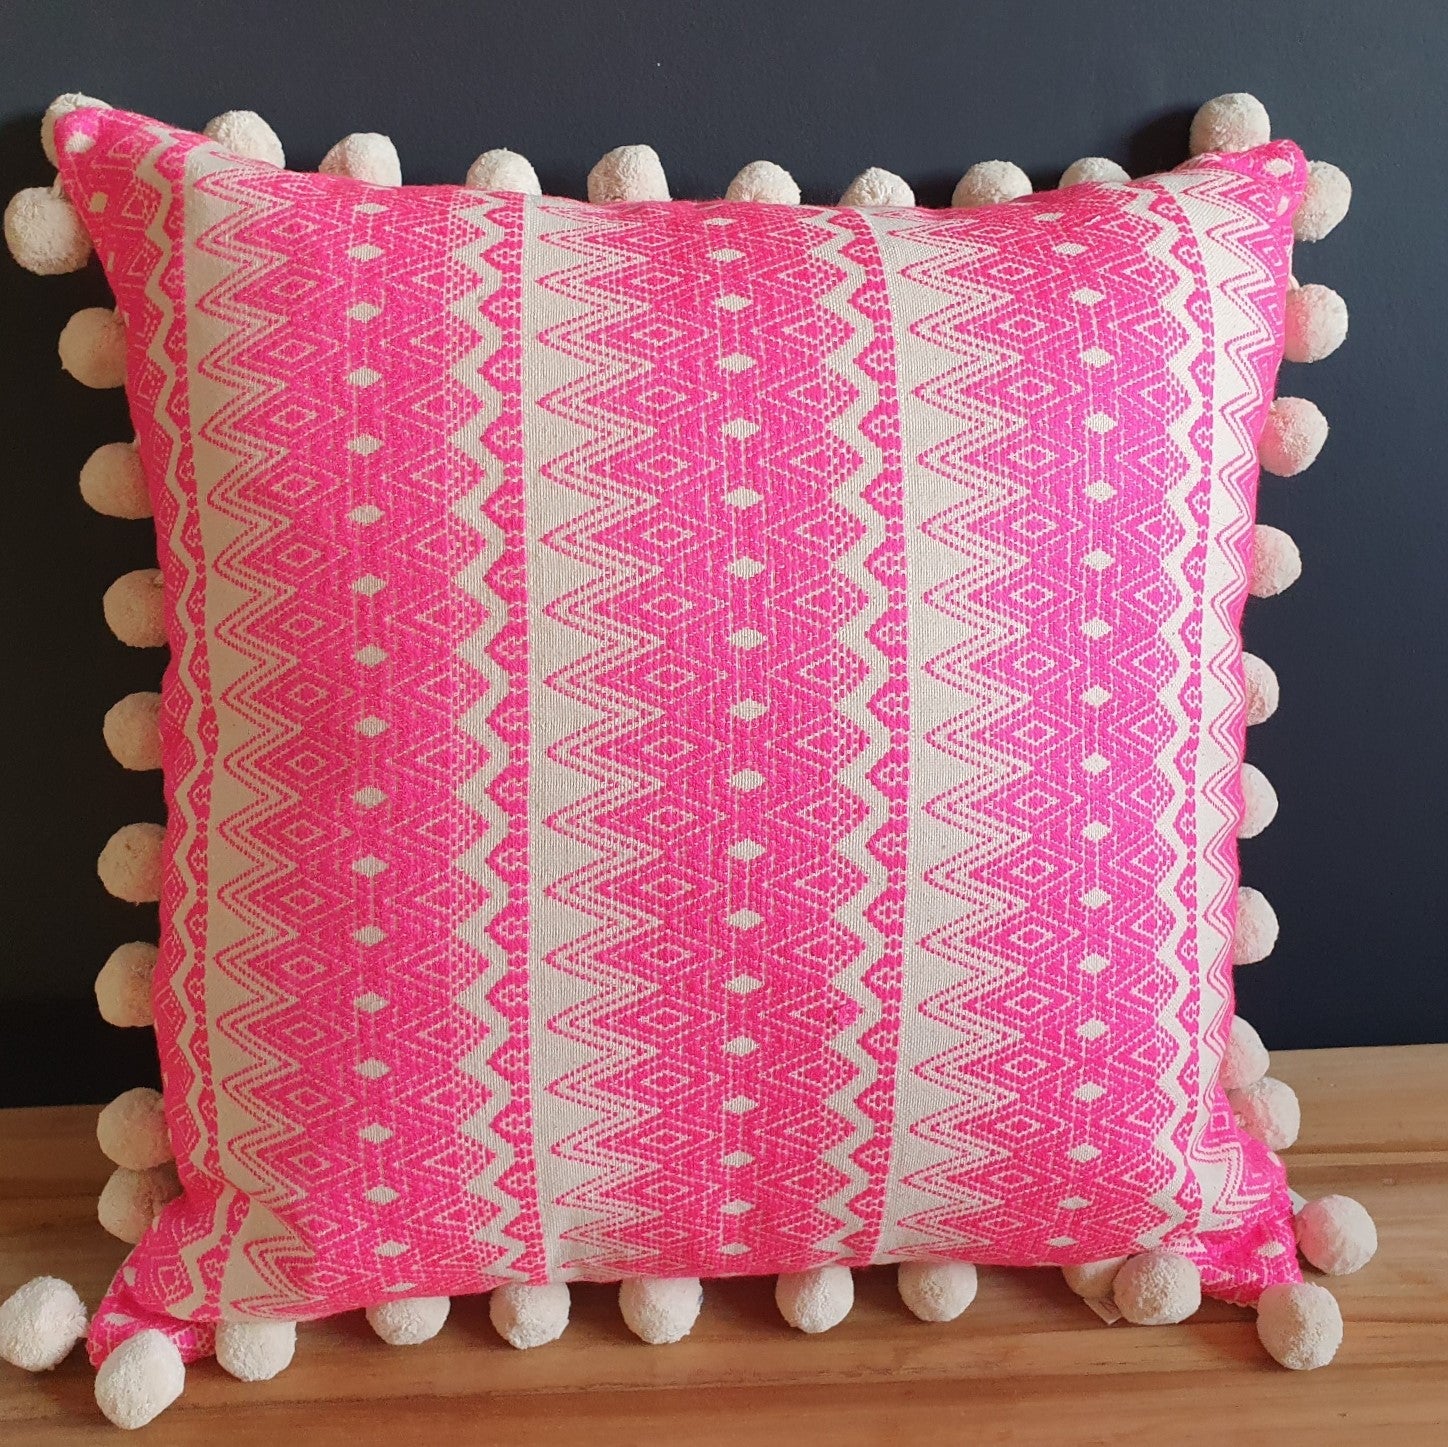 Chi Chi Large Square Double-Sided Neon Pink Cushion with Pom Poms.